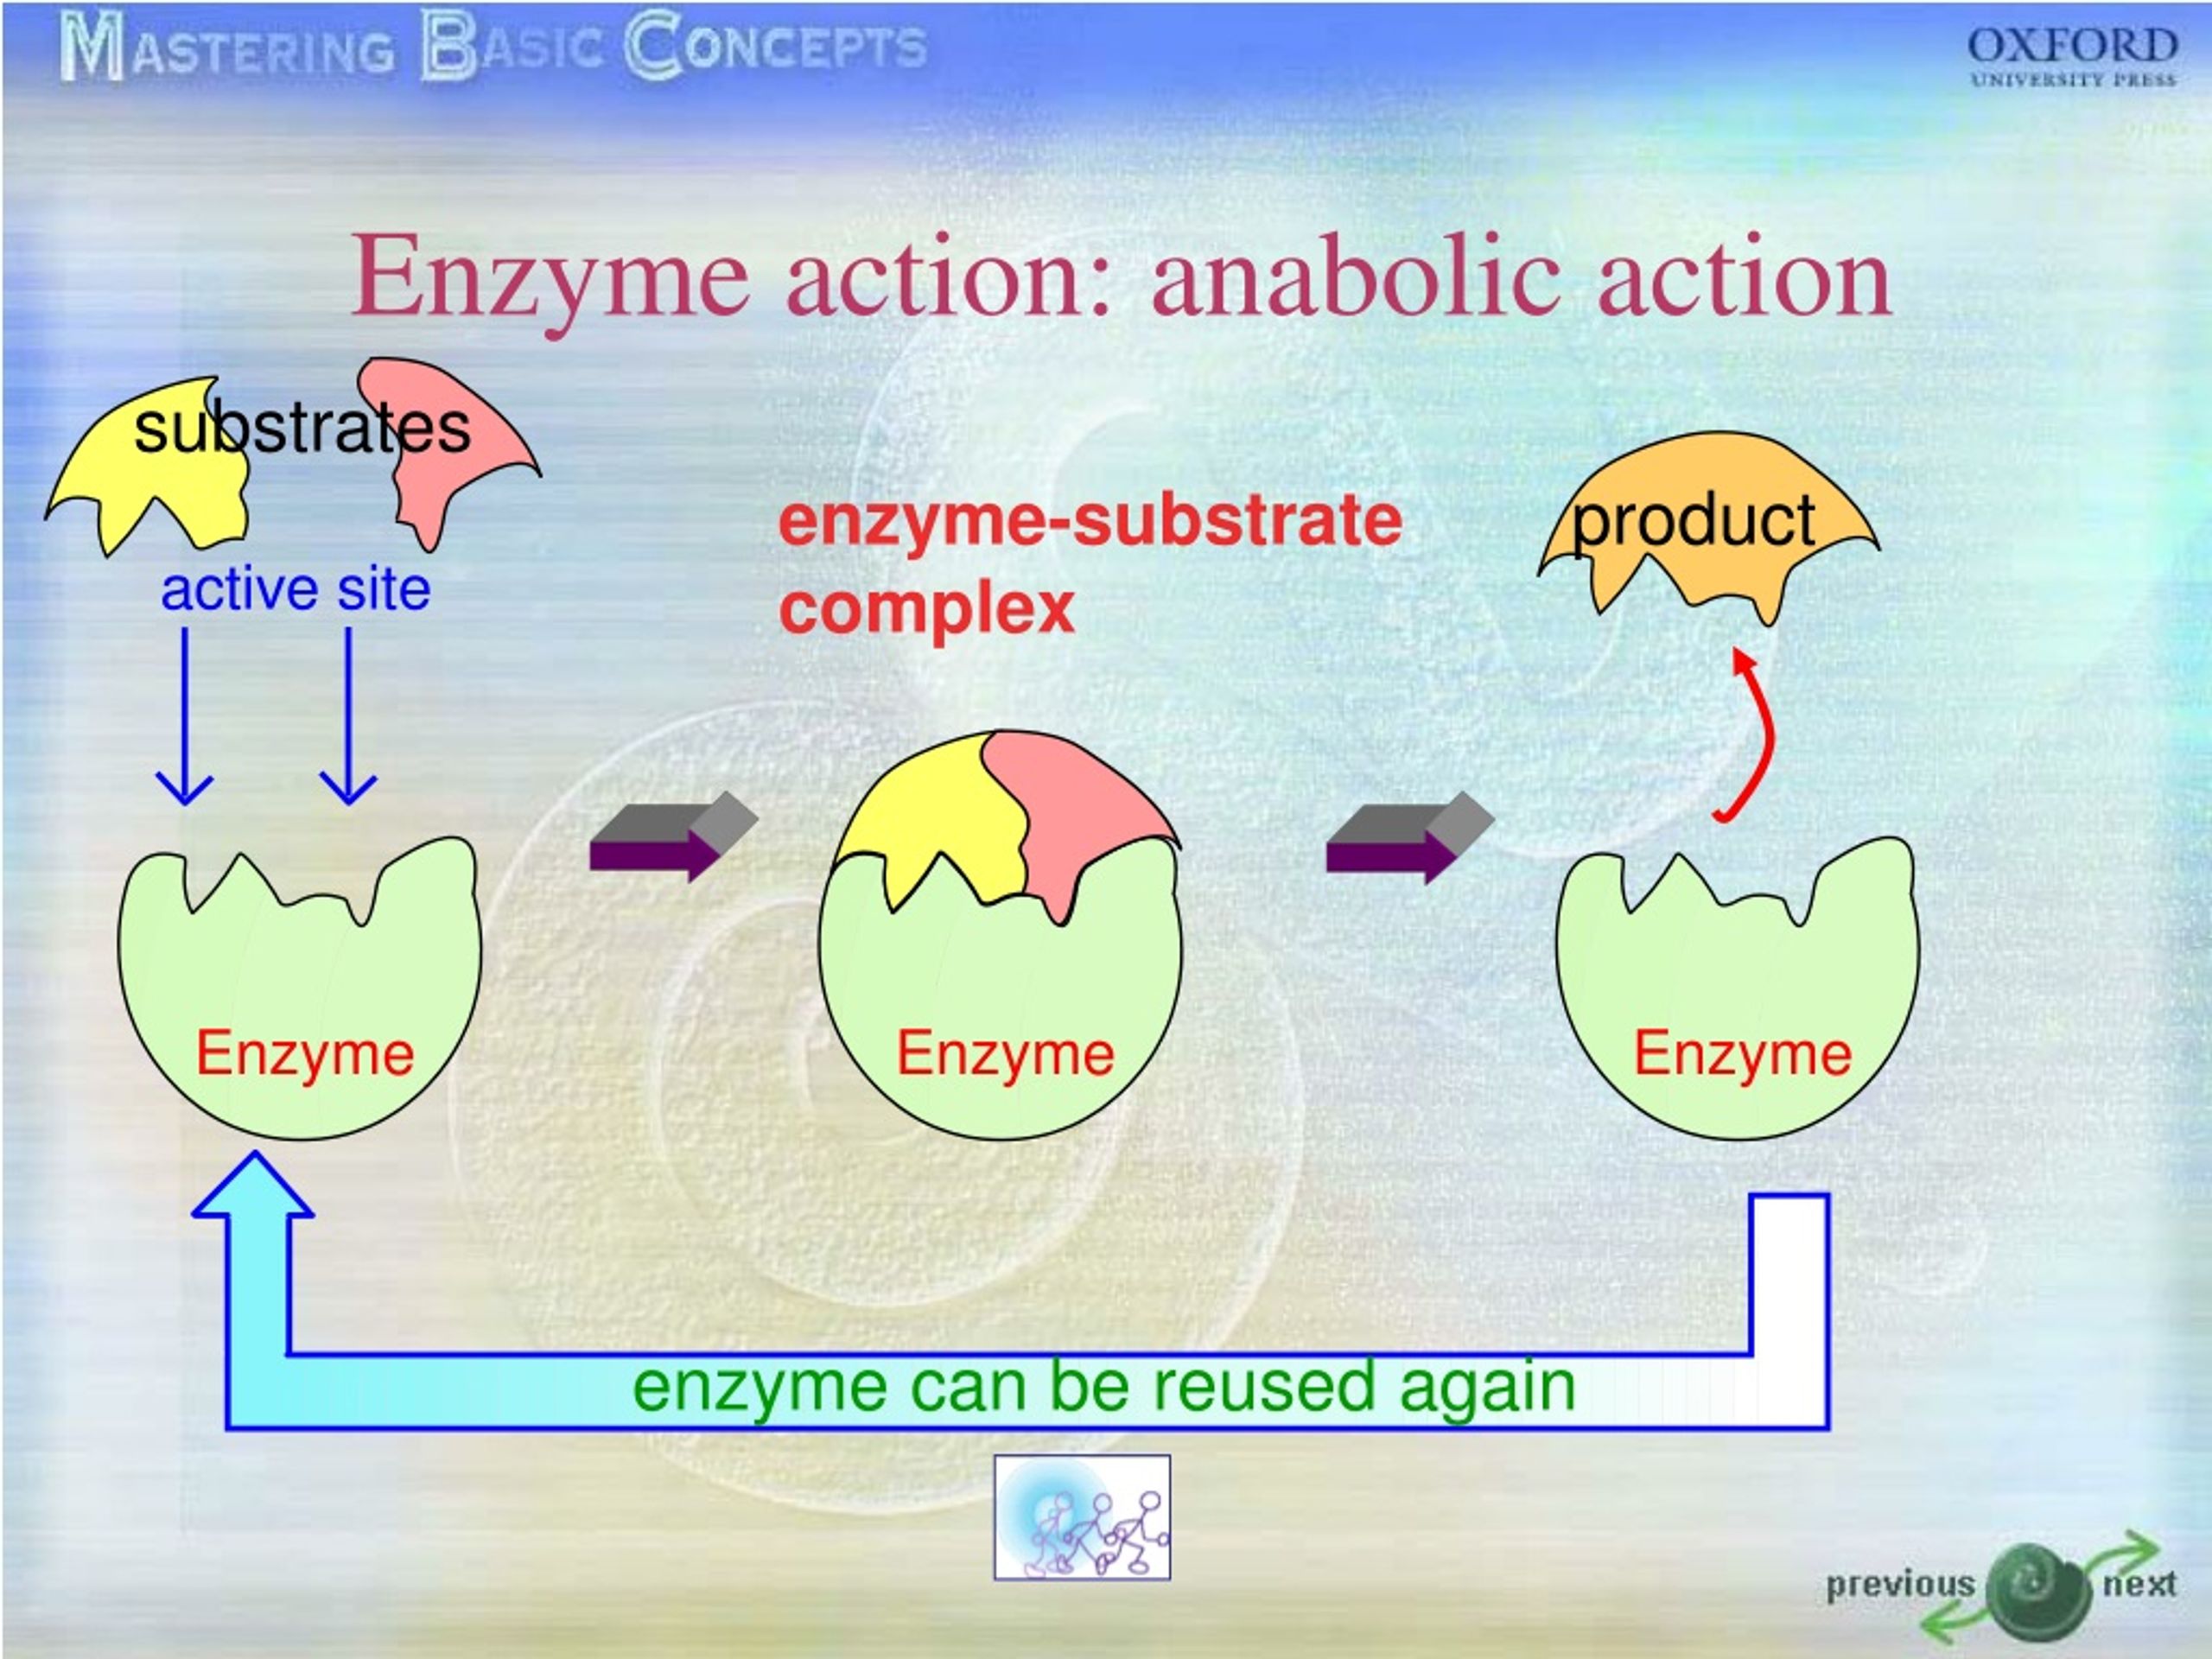 effects that enzymes can have on substrates